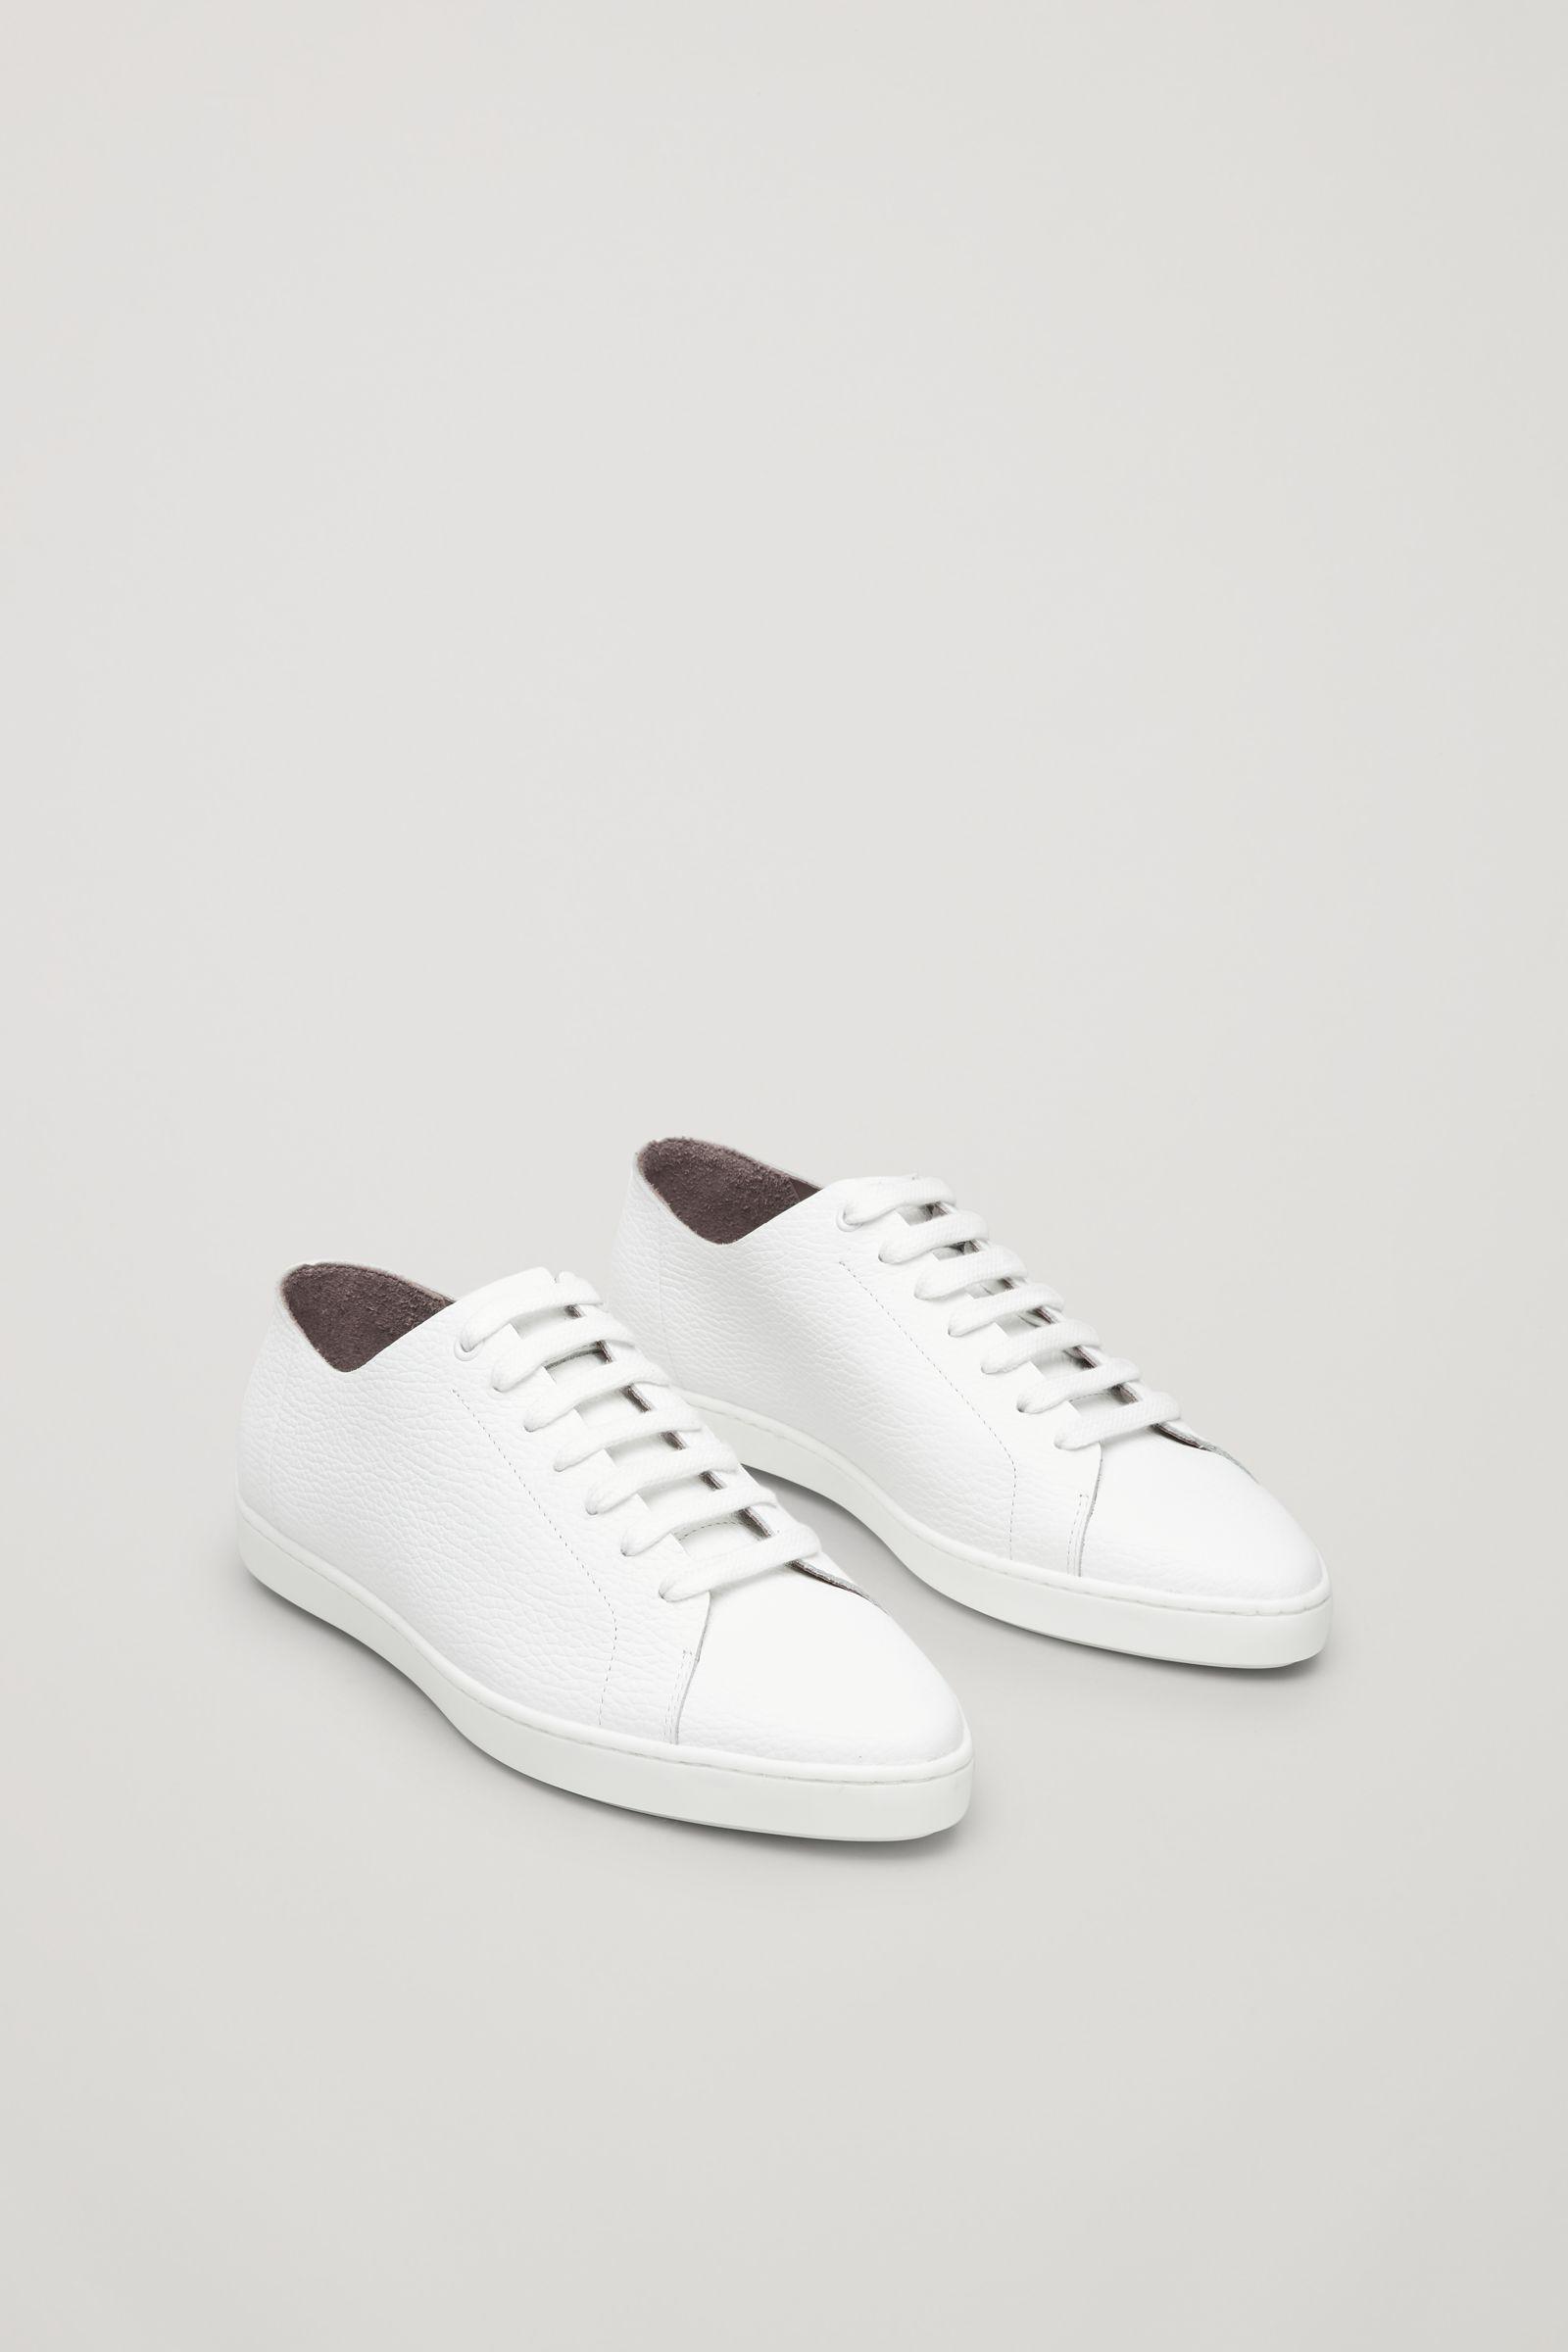 COS Leather Pointed Sneaker in White - Lyst